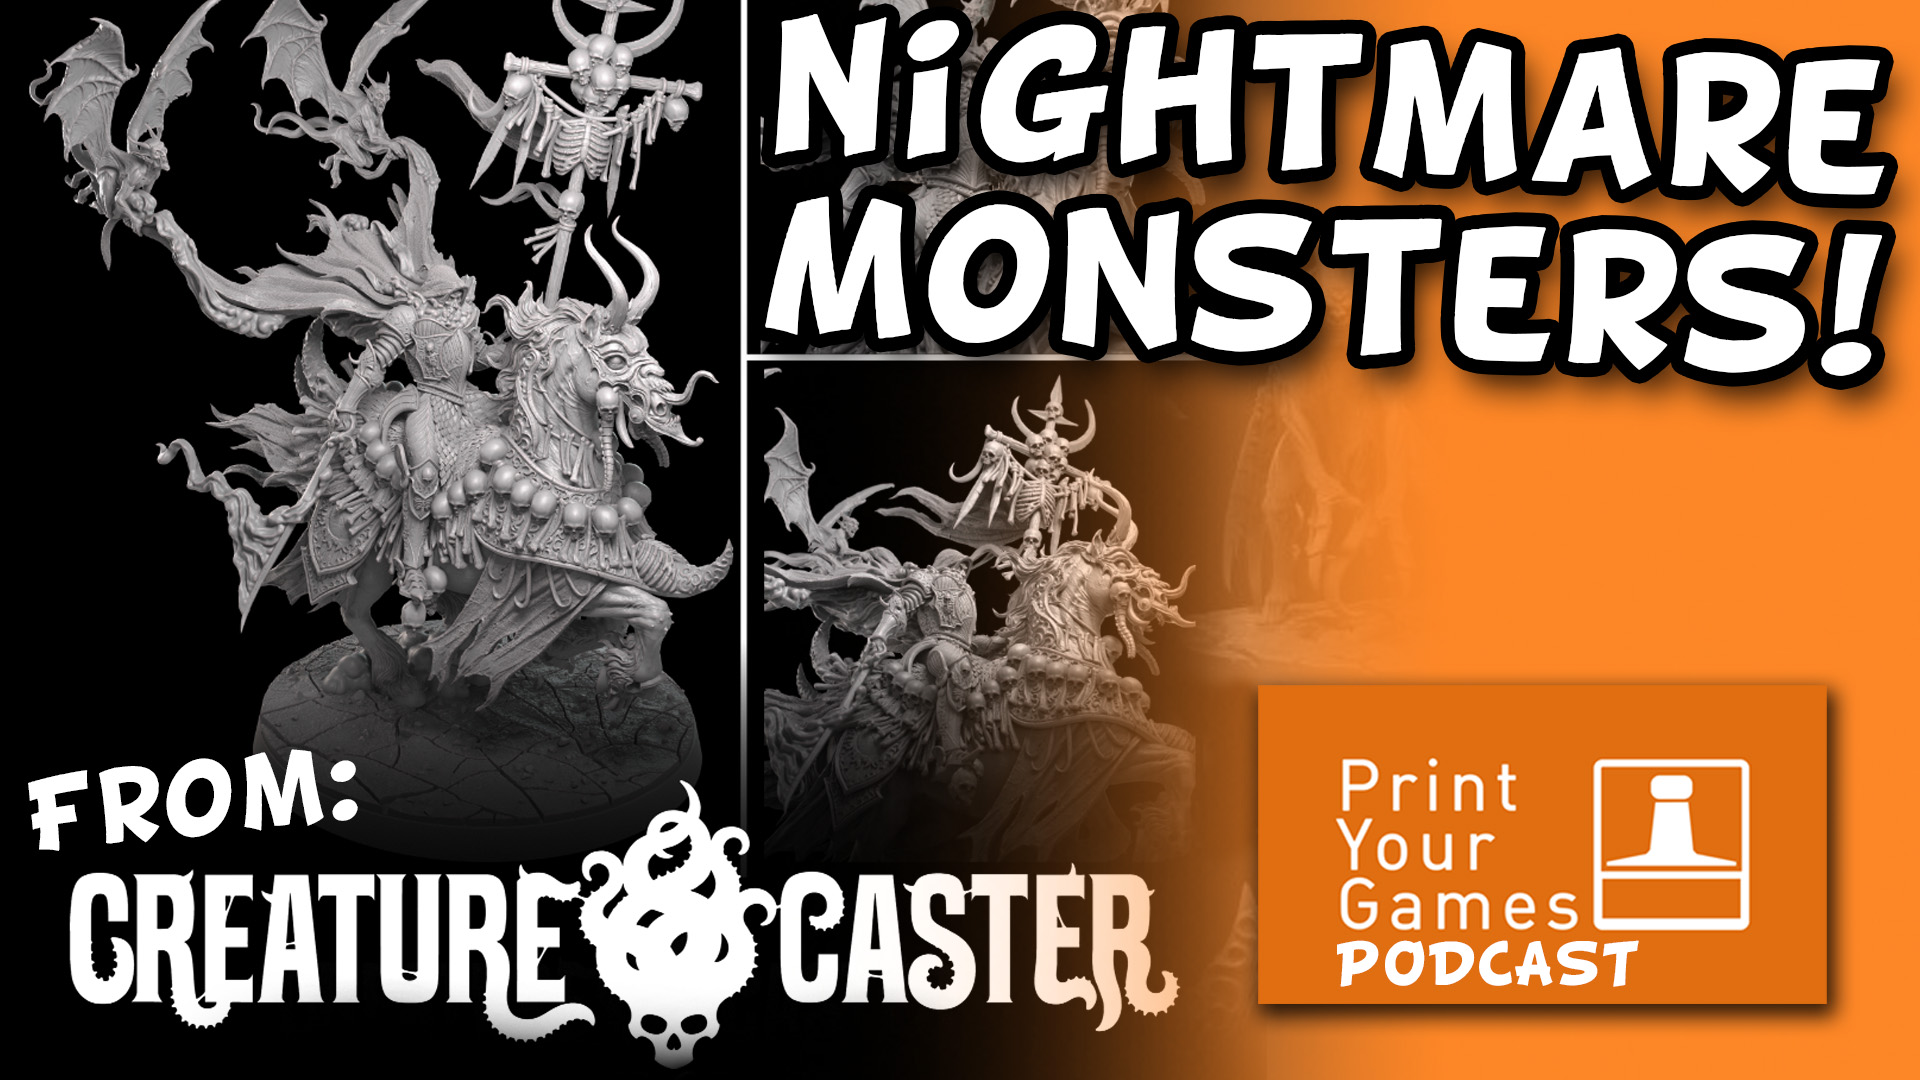 Nightmare Monsters from Creature Caster